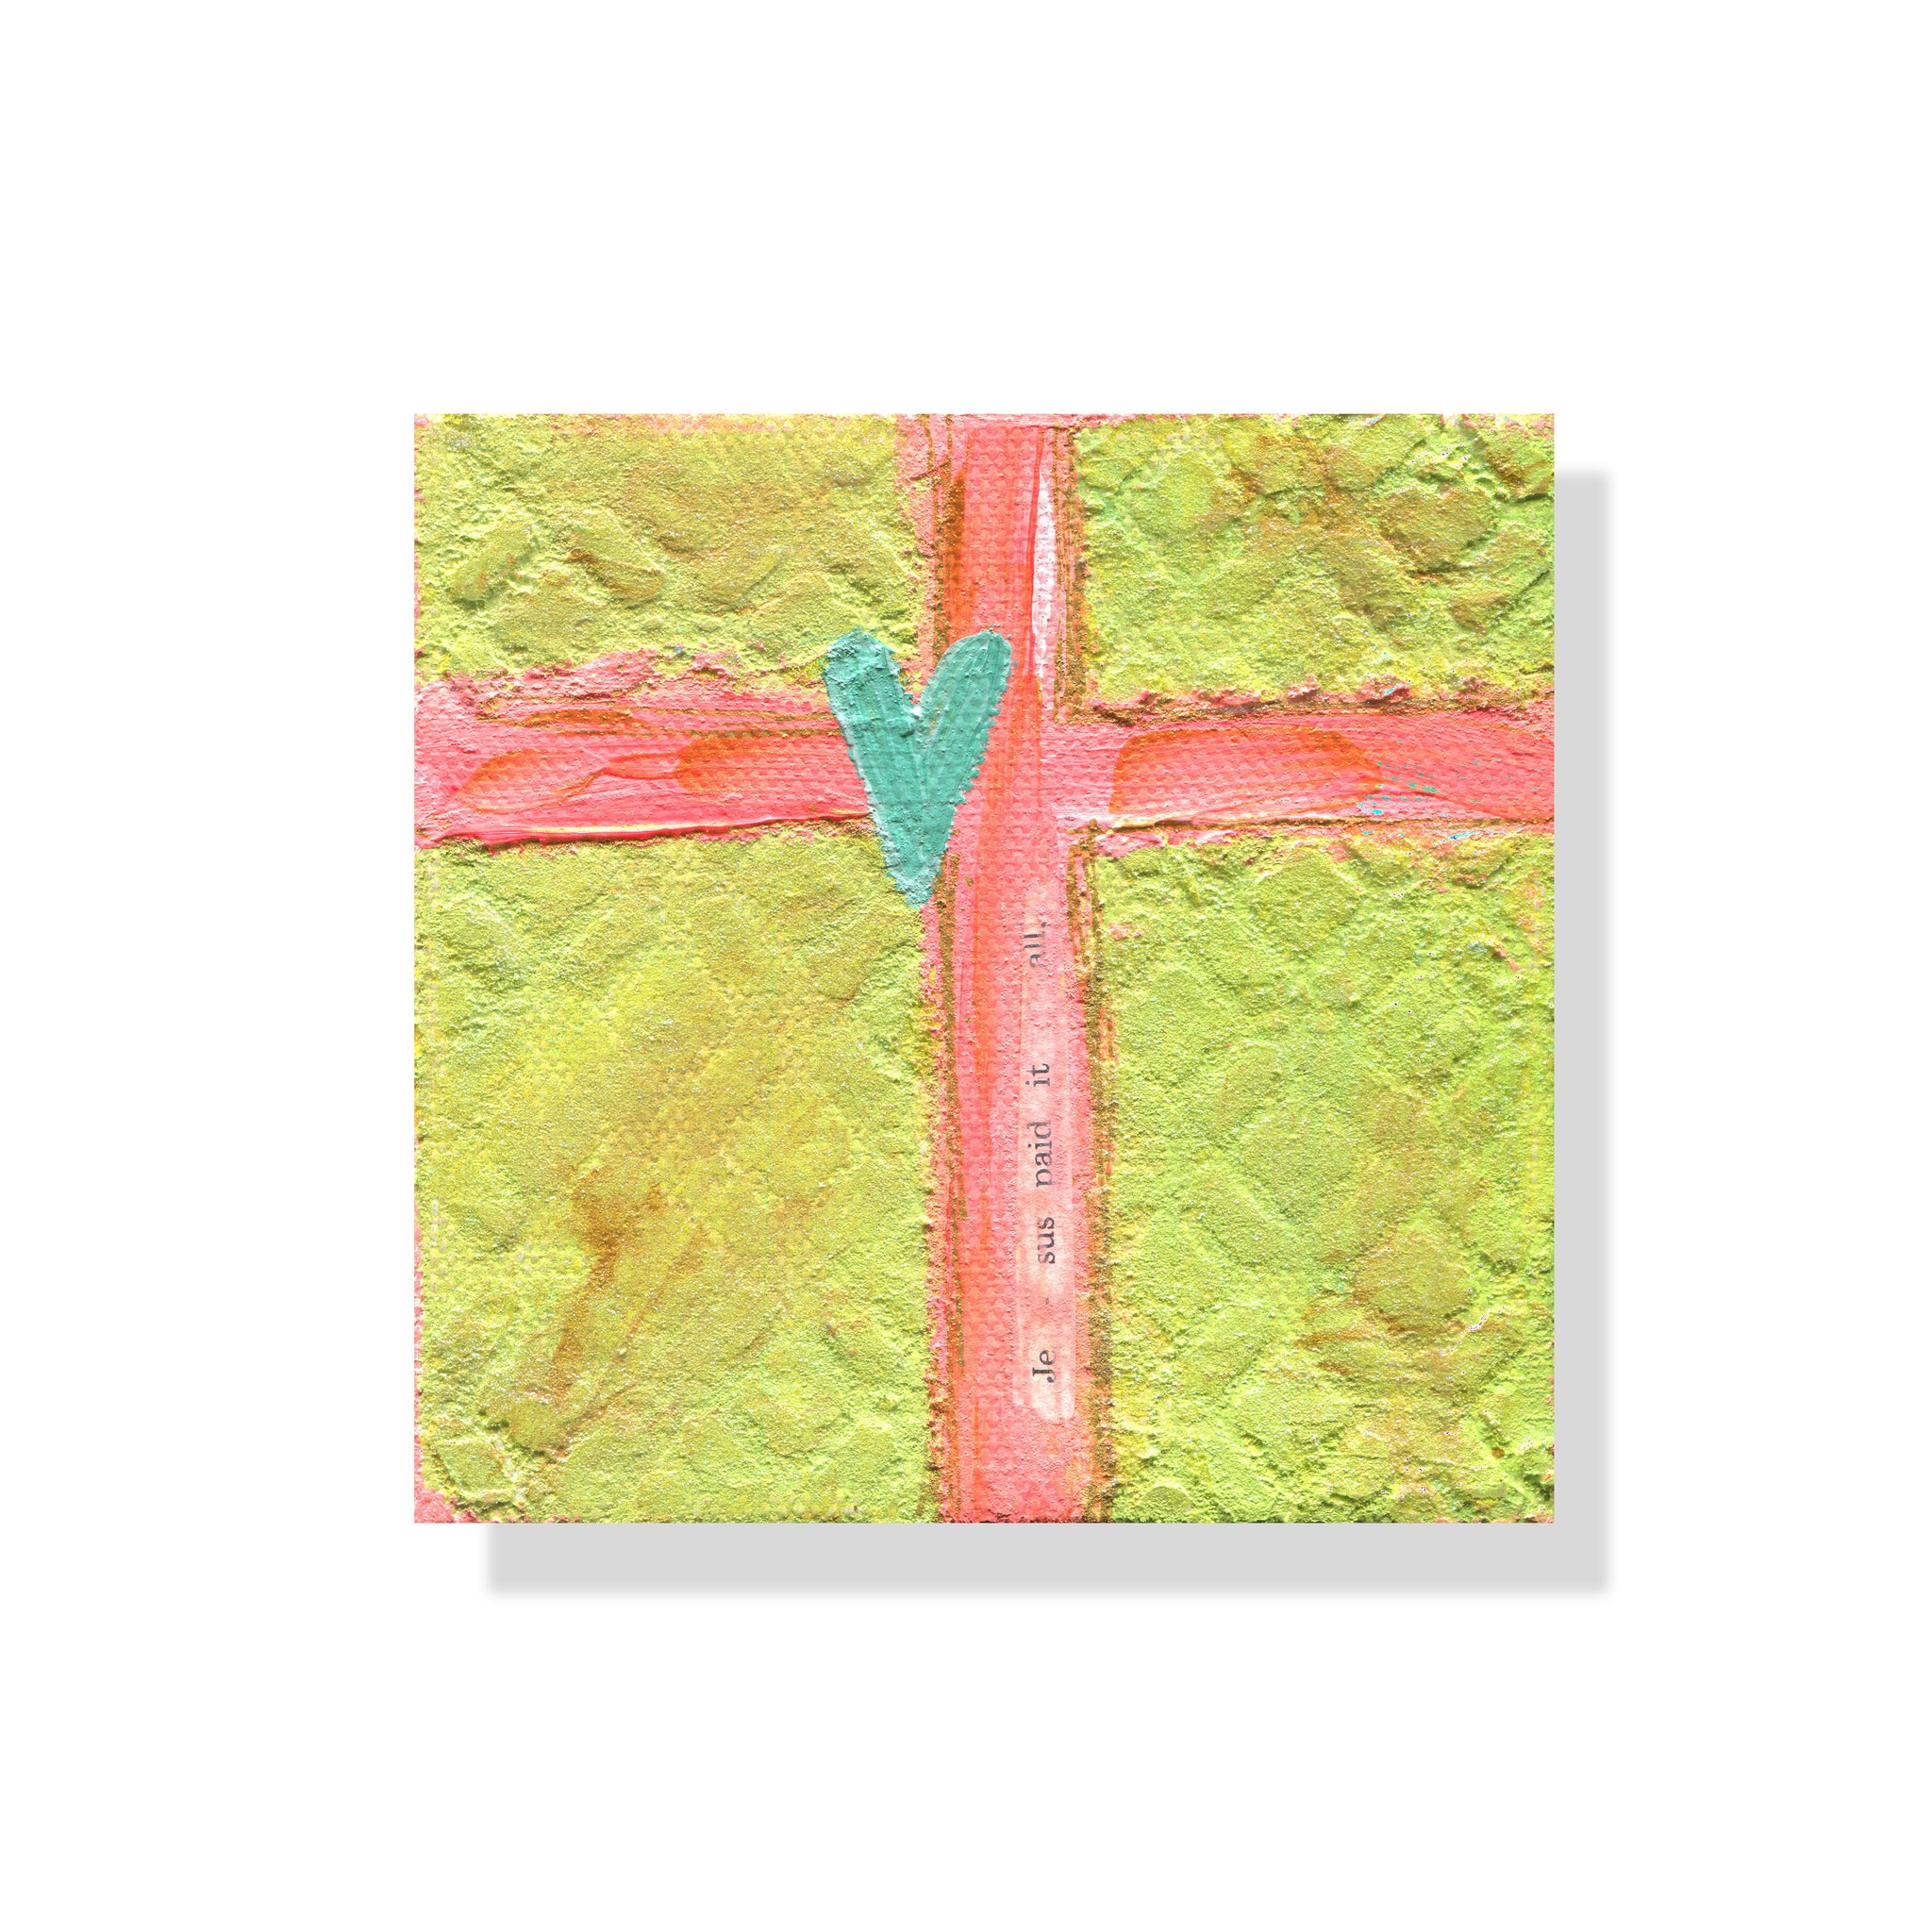 Pink and Green Cross "Paid" 4x4 inches: Cross Collection